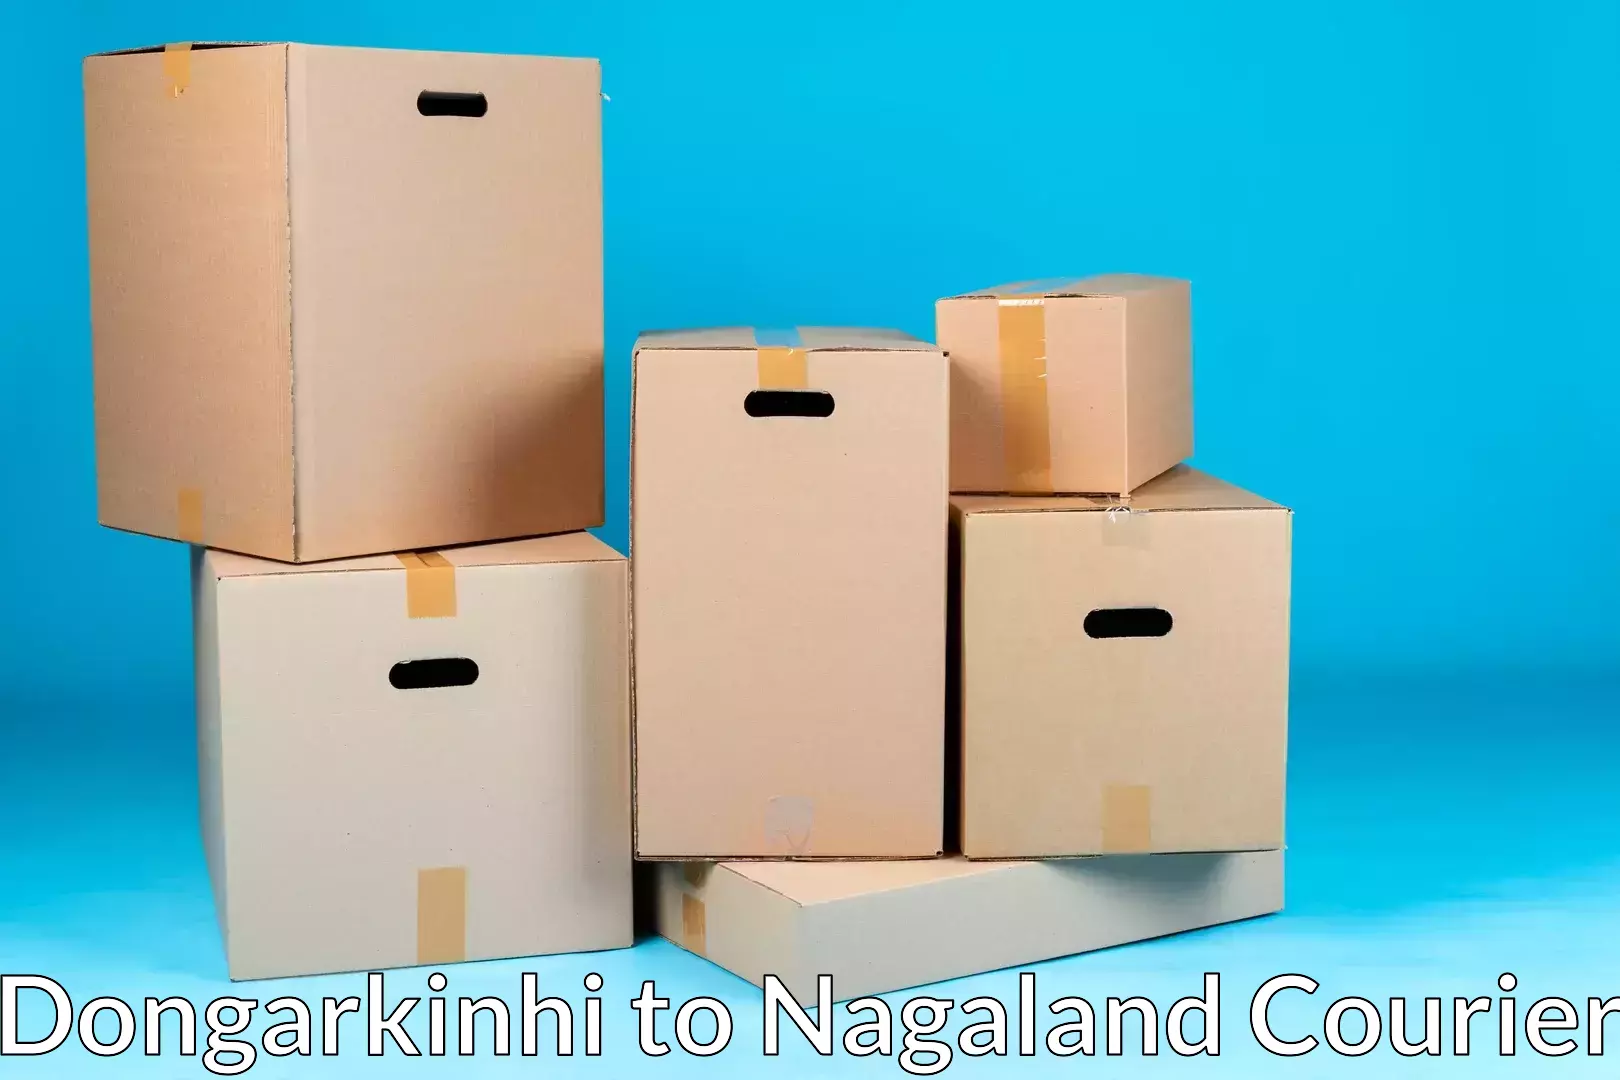 Trusted relocation services Dongarkinhi to NIT Nagaland